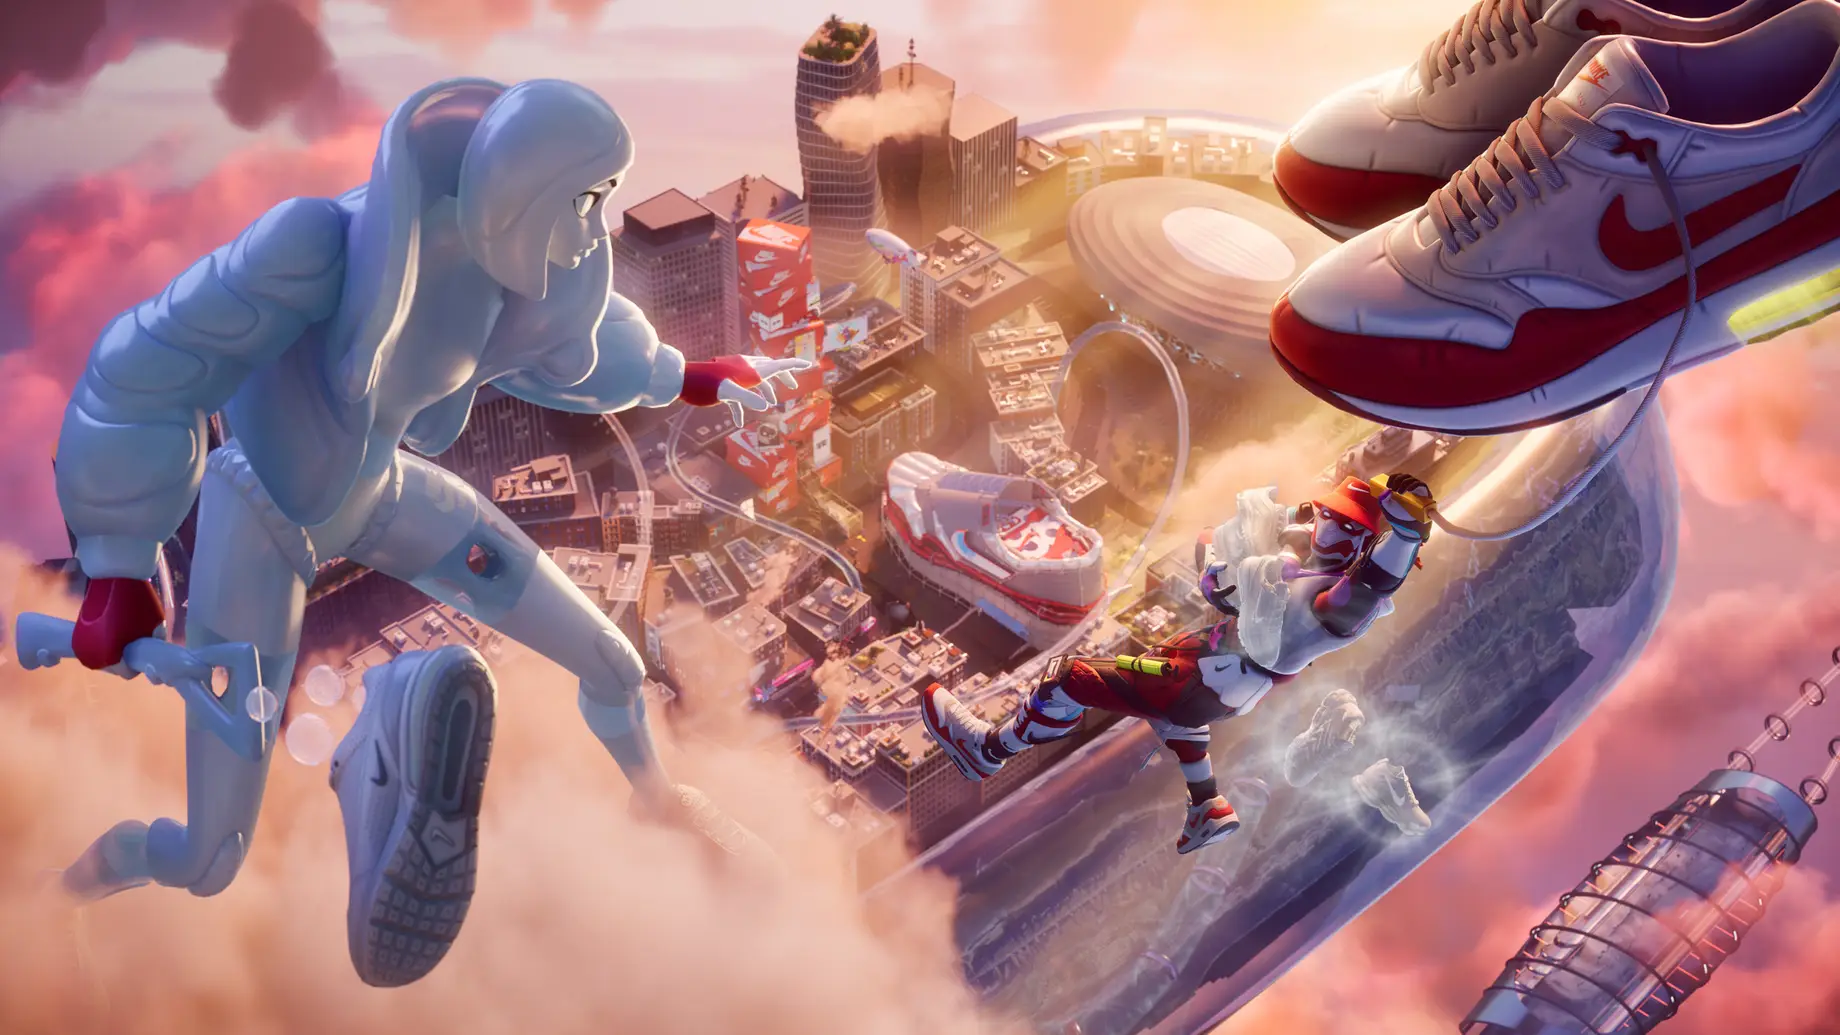 Nike x Fortnite “Airphoria” Experience Dazzles Gamers